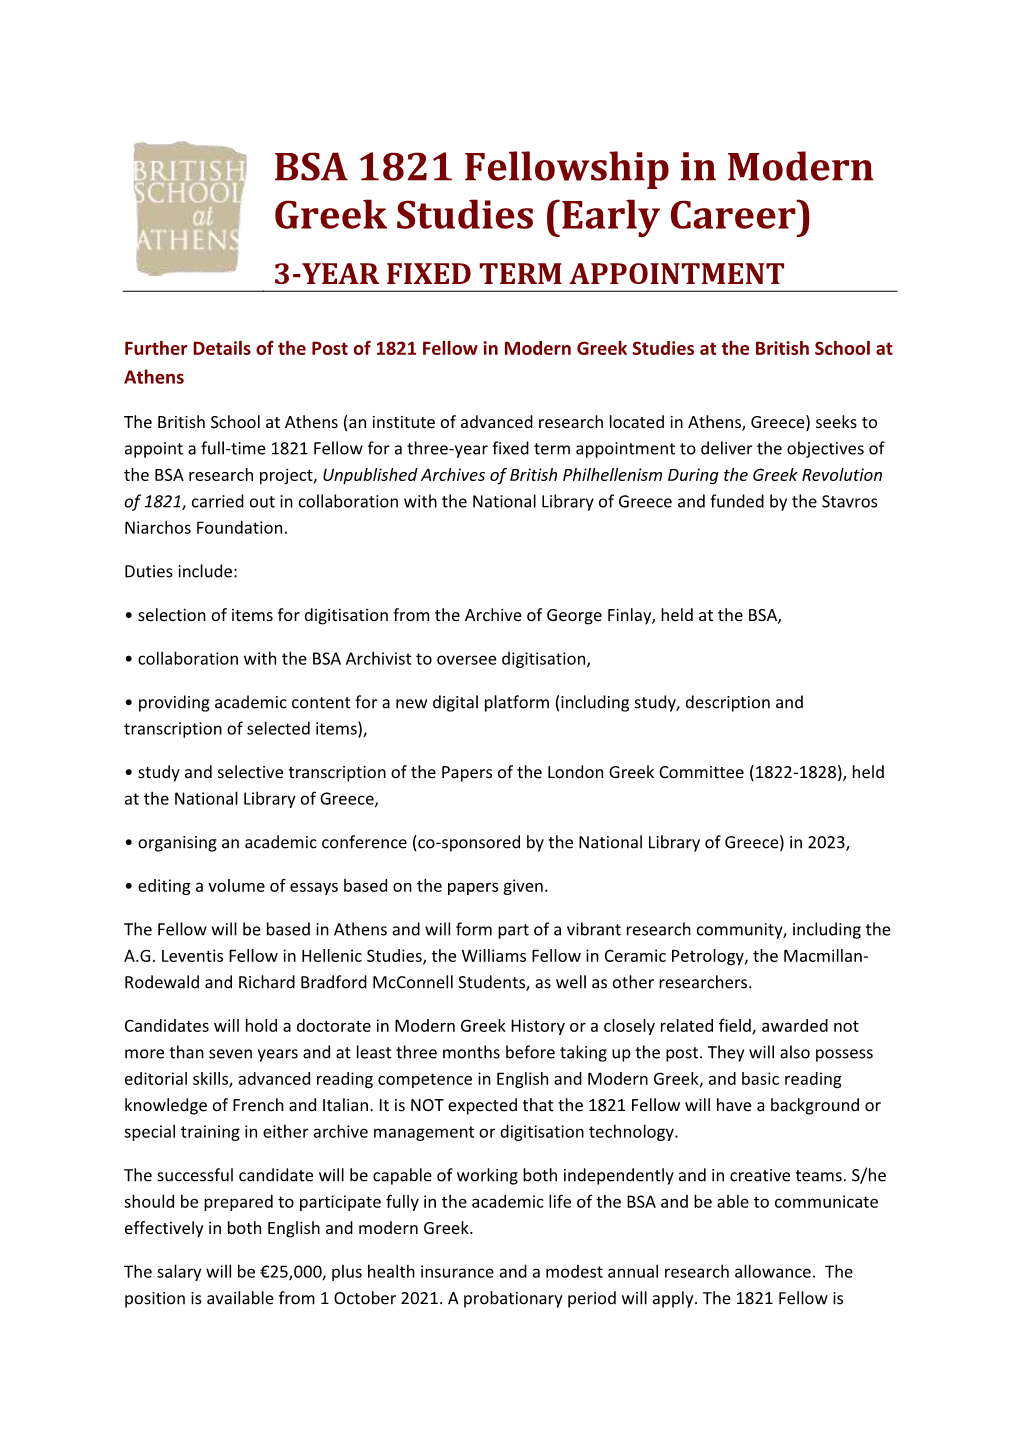 BSA 1821 Fellowship in Modern Greek Studies (Early Career) 3-YEAR FIXED TERM APPOINTMENT